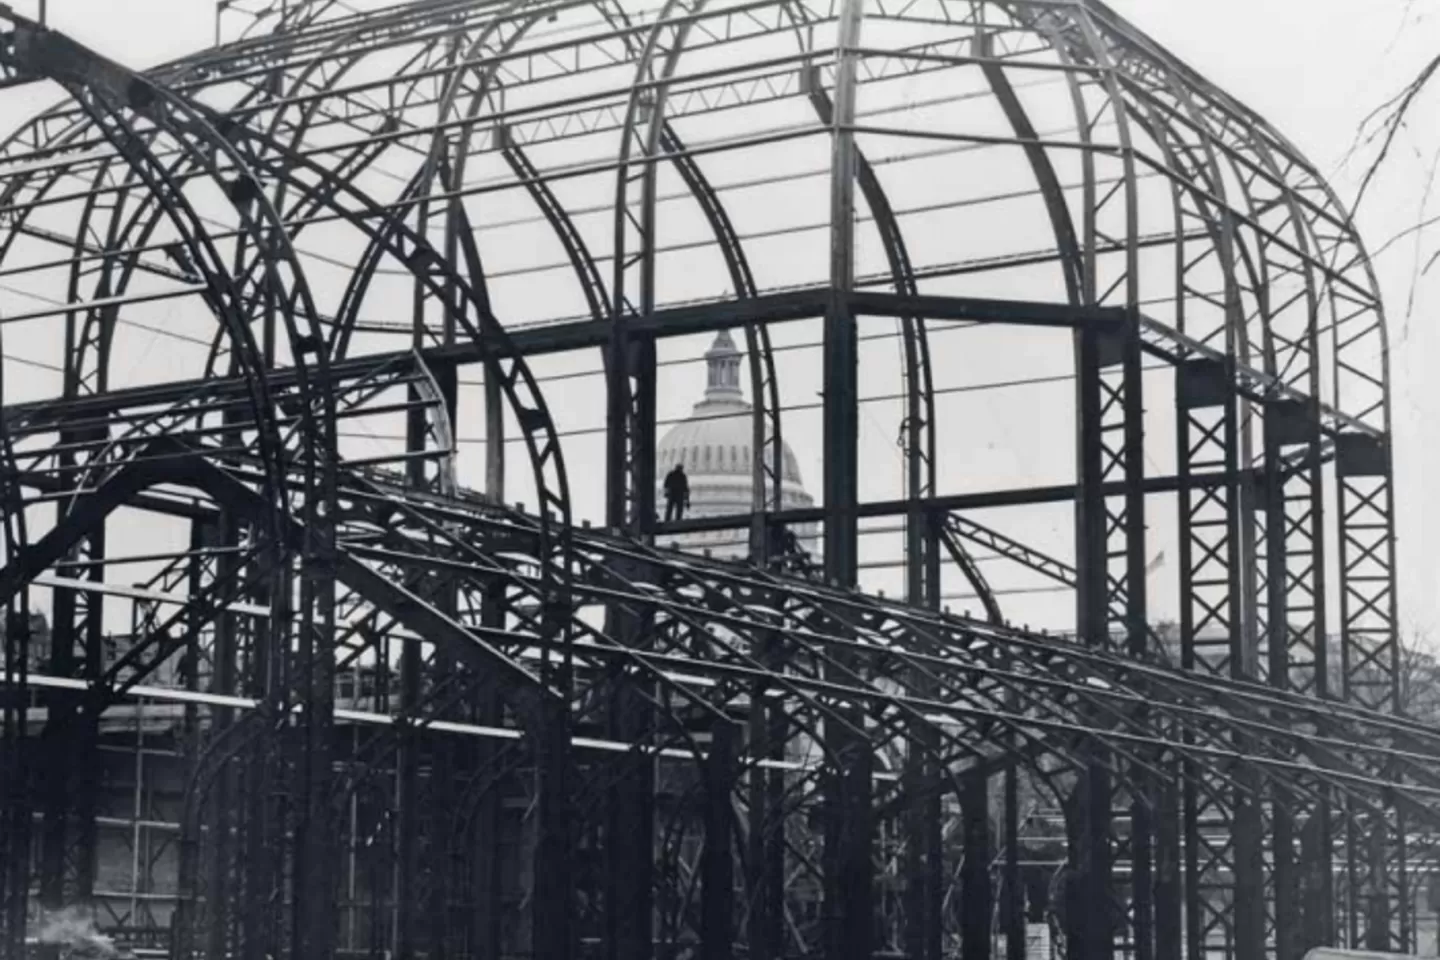 USBG Conservatory aluminum structure frames the Capitol Dome in 1932.